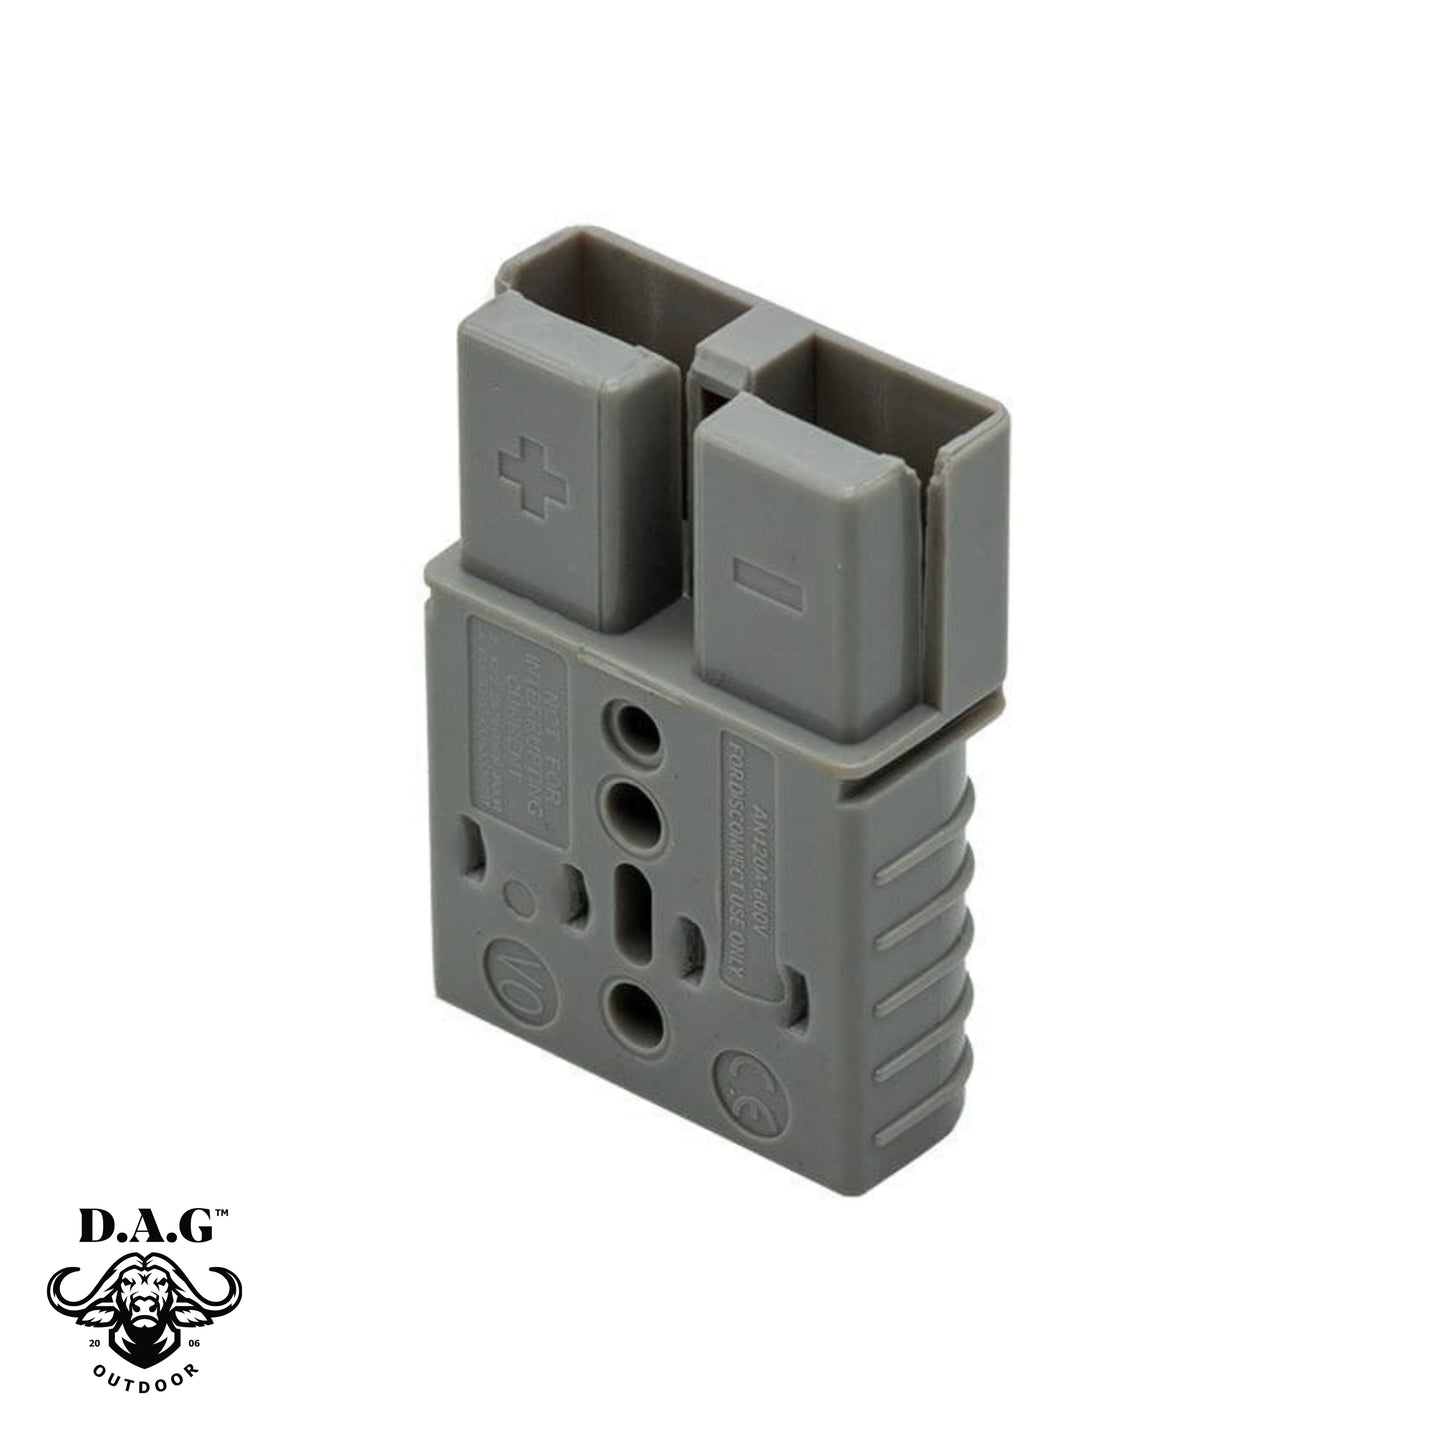 D.A.G | Brad Harrison 175 AMP Wire size (AWG) Plug fitting